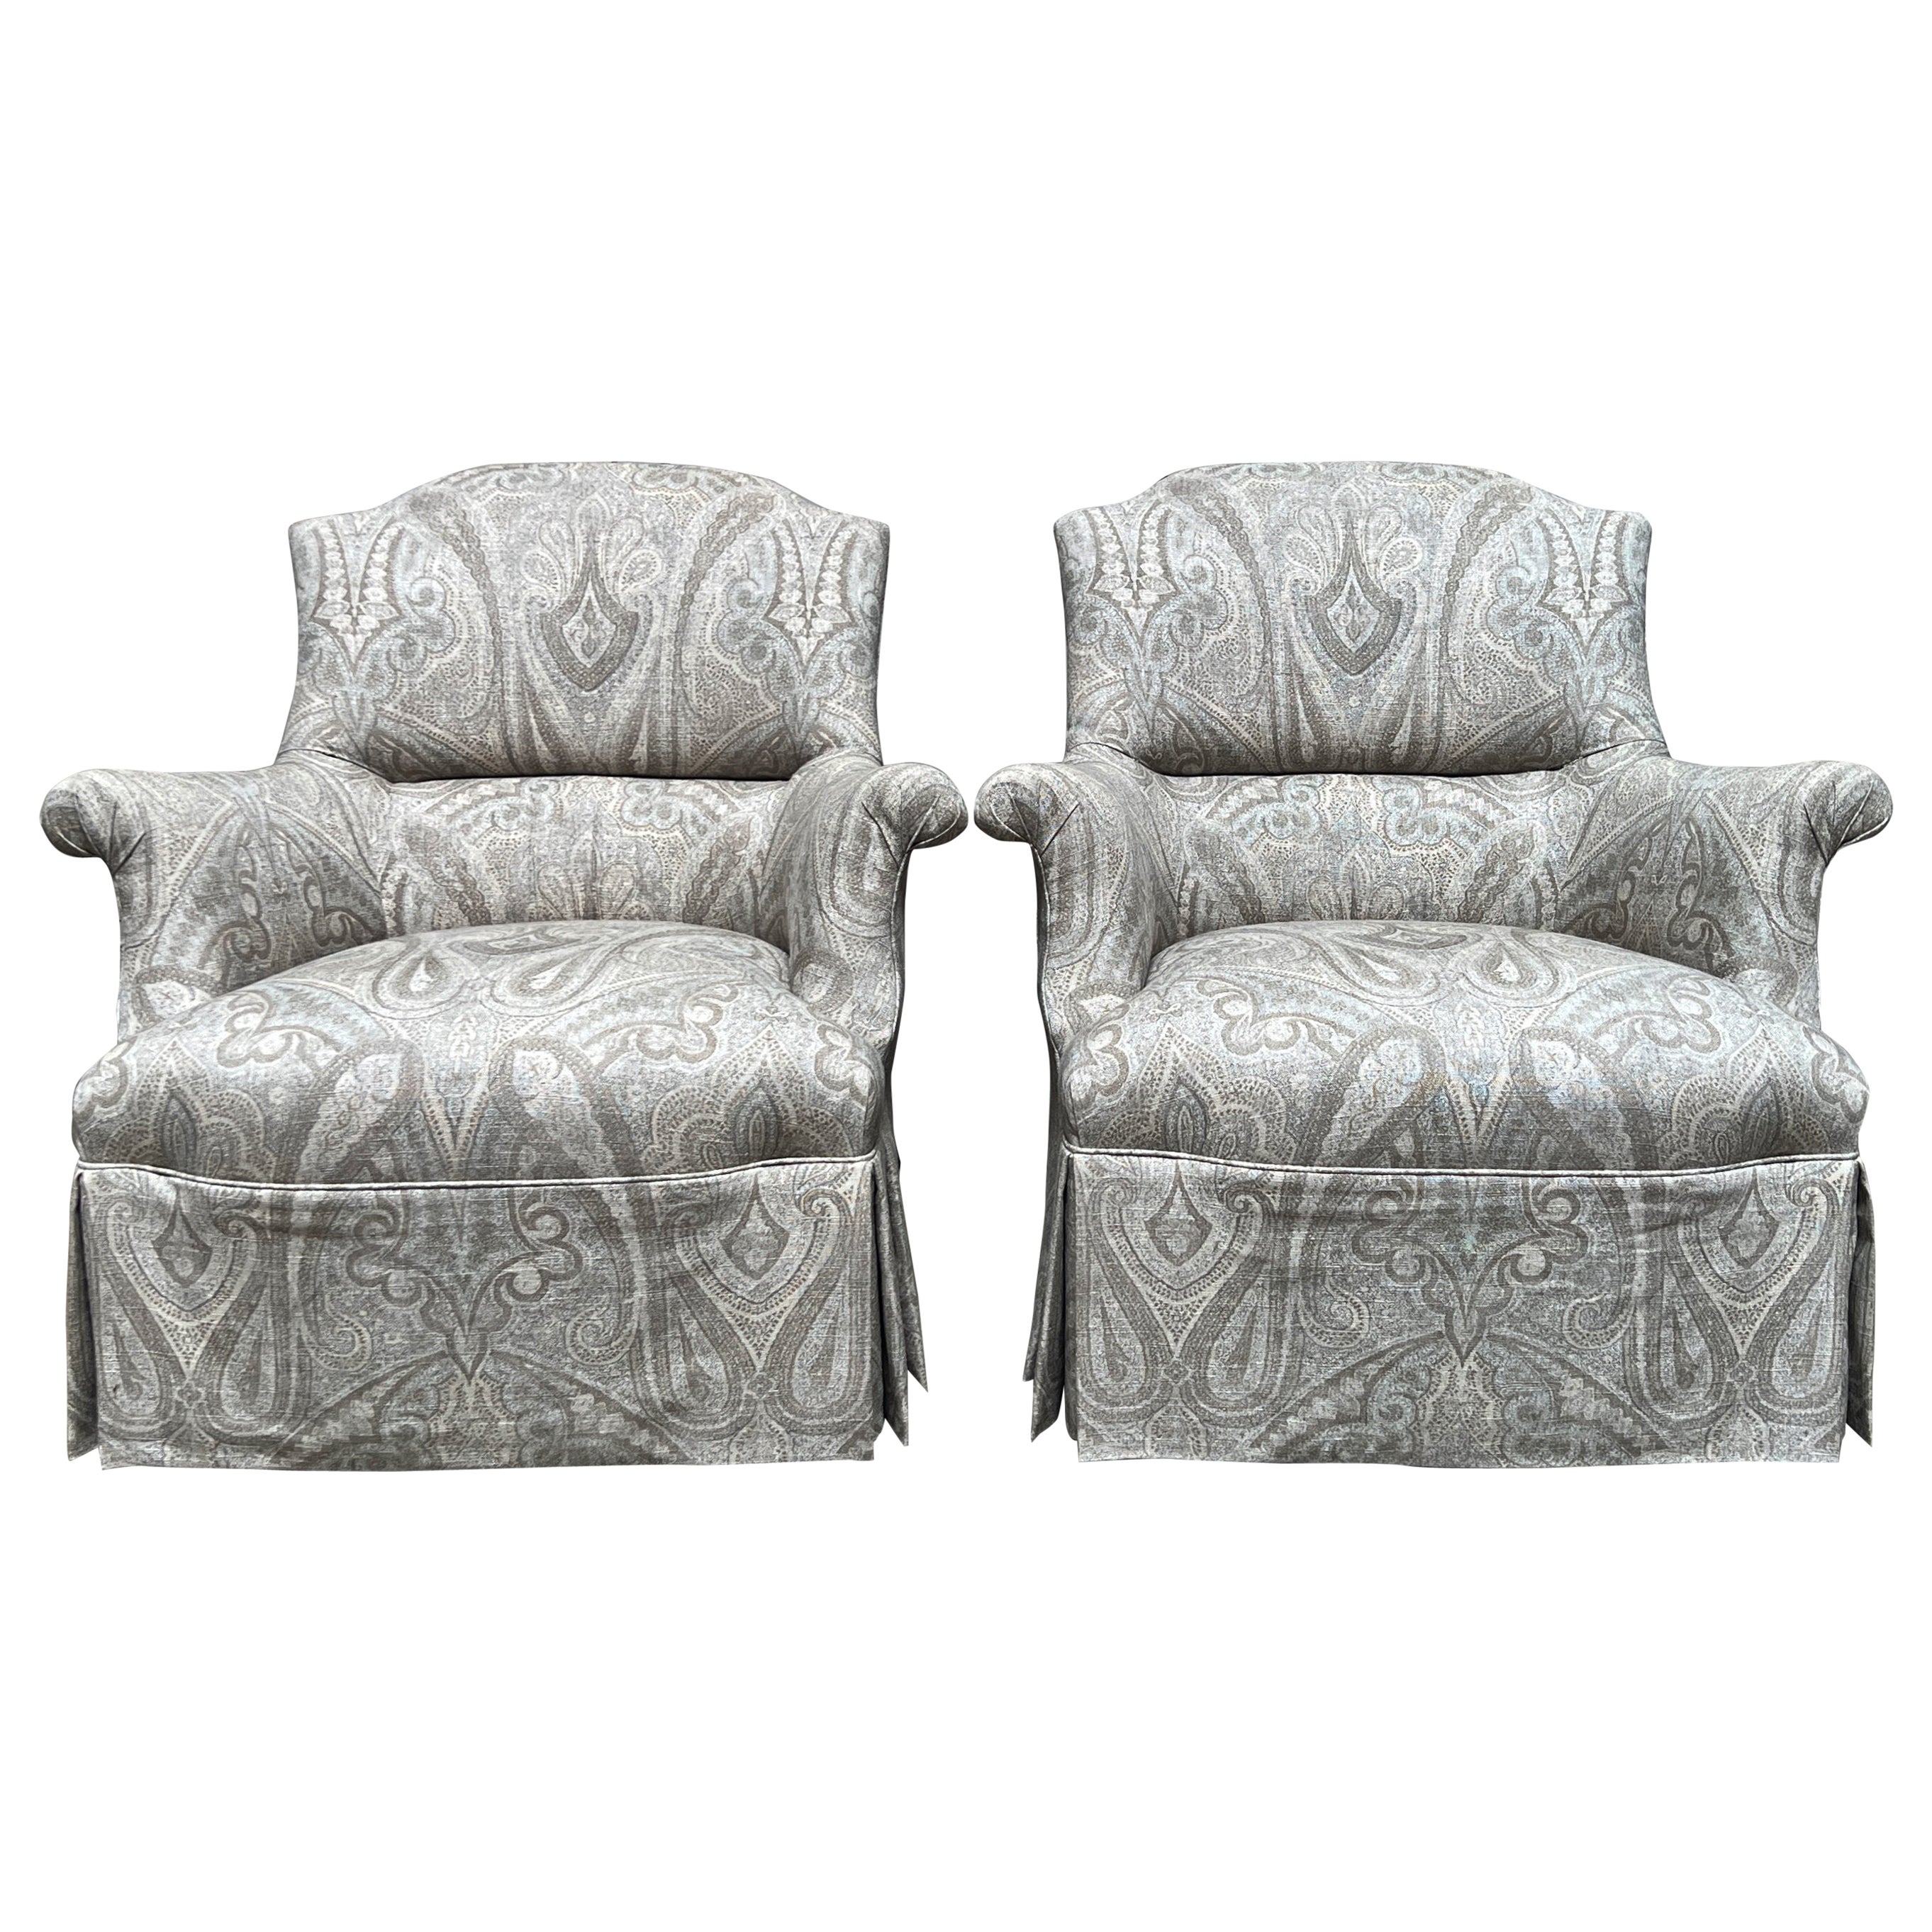 Pair of Napoleon III Style Upholstered Lounge Chairs in Gray Paisley Fabric For Sale